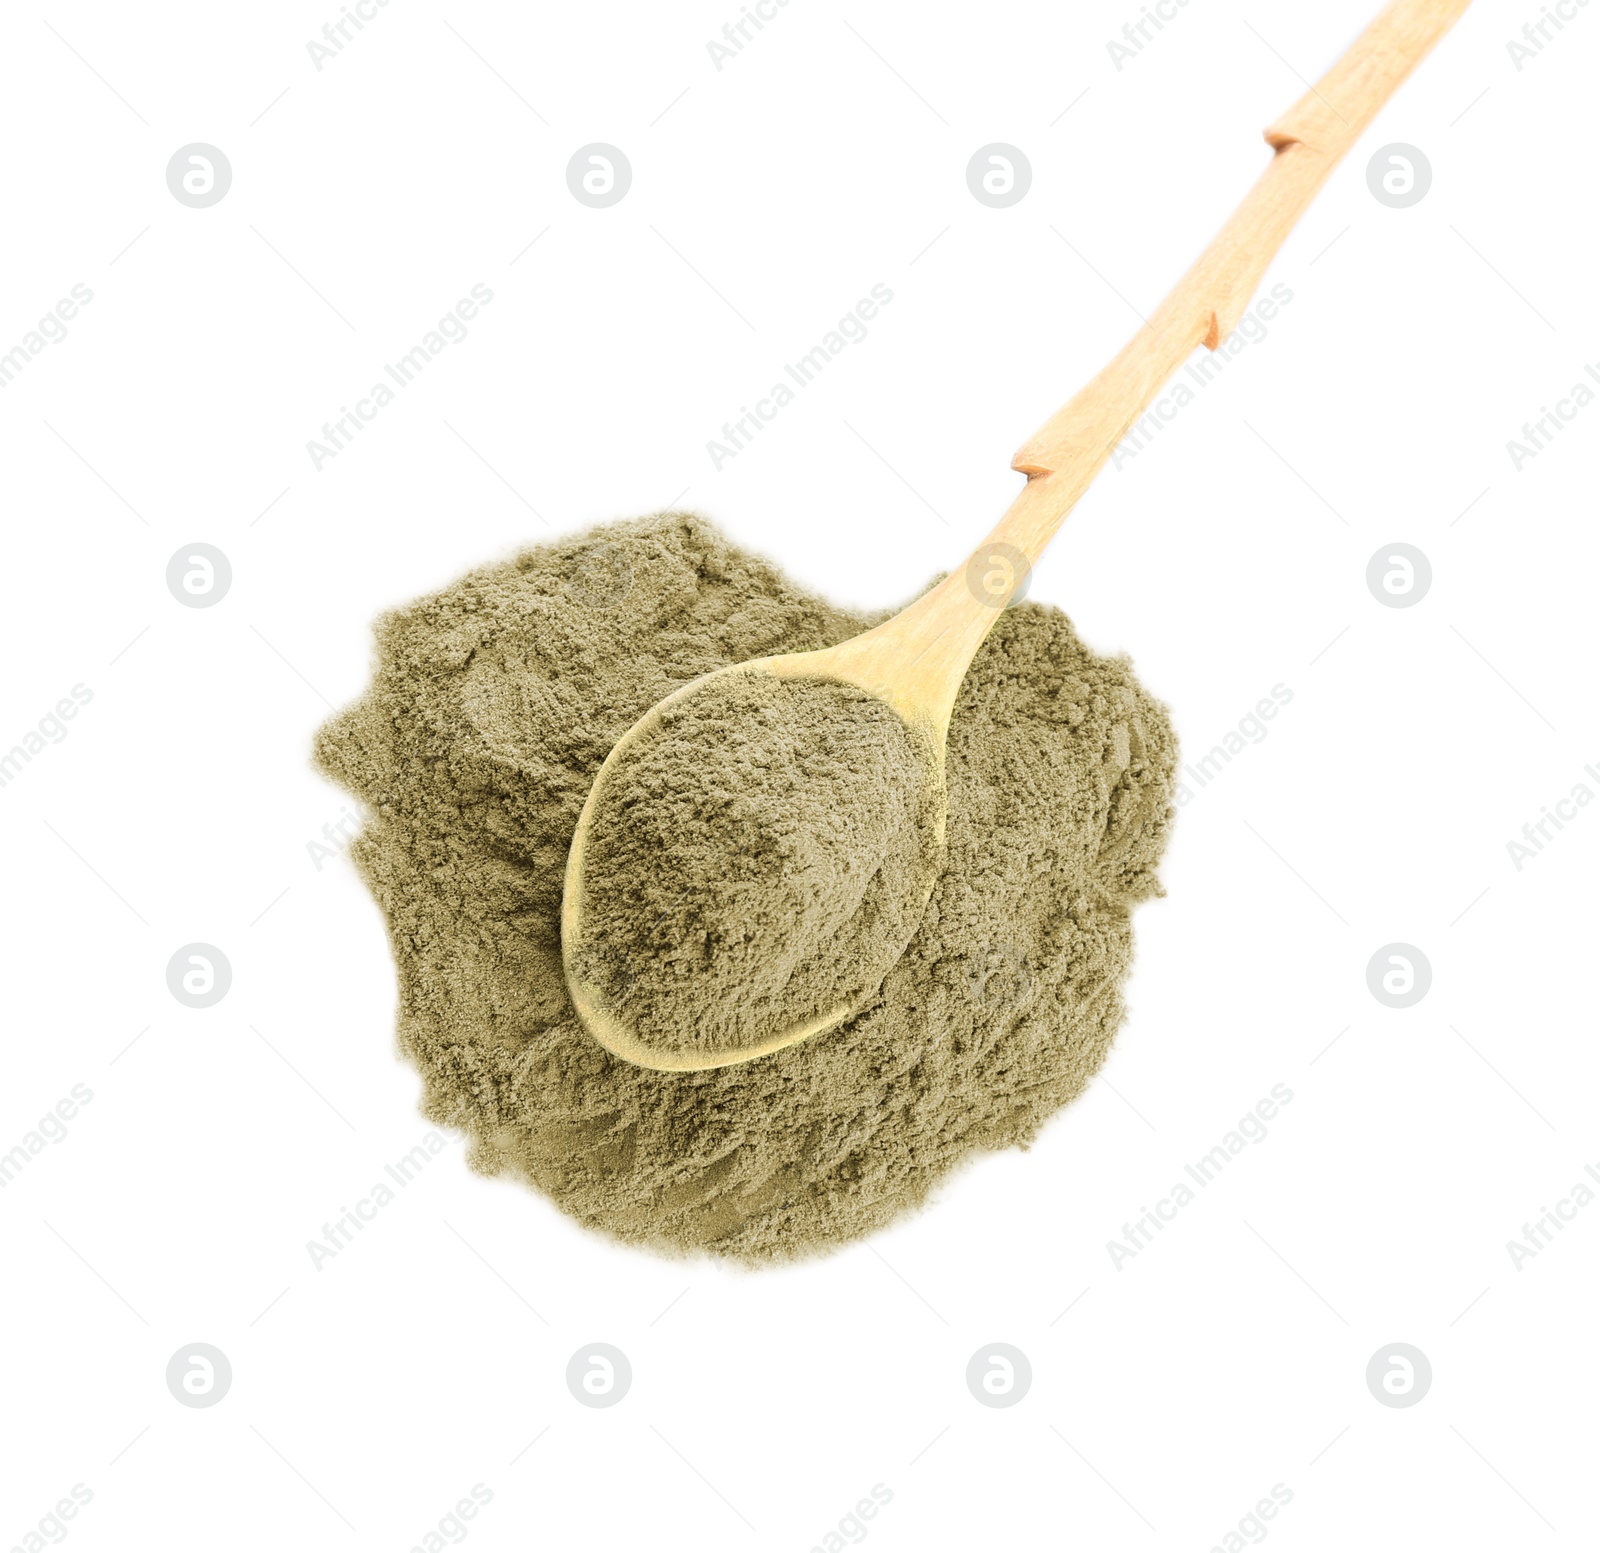 Photo of Hemp protein powder and spoon on white background, top view